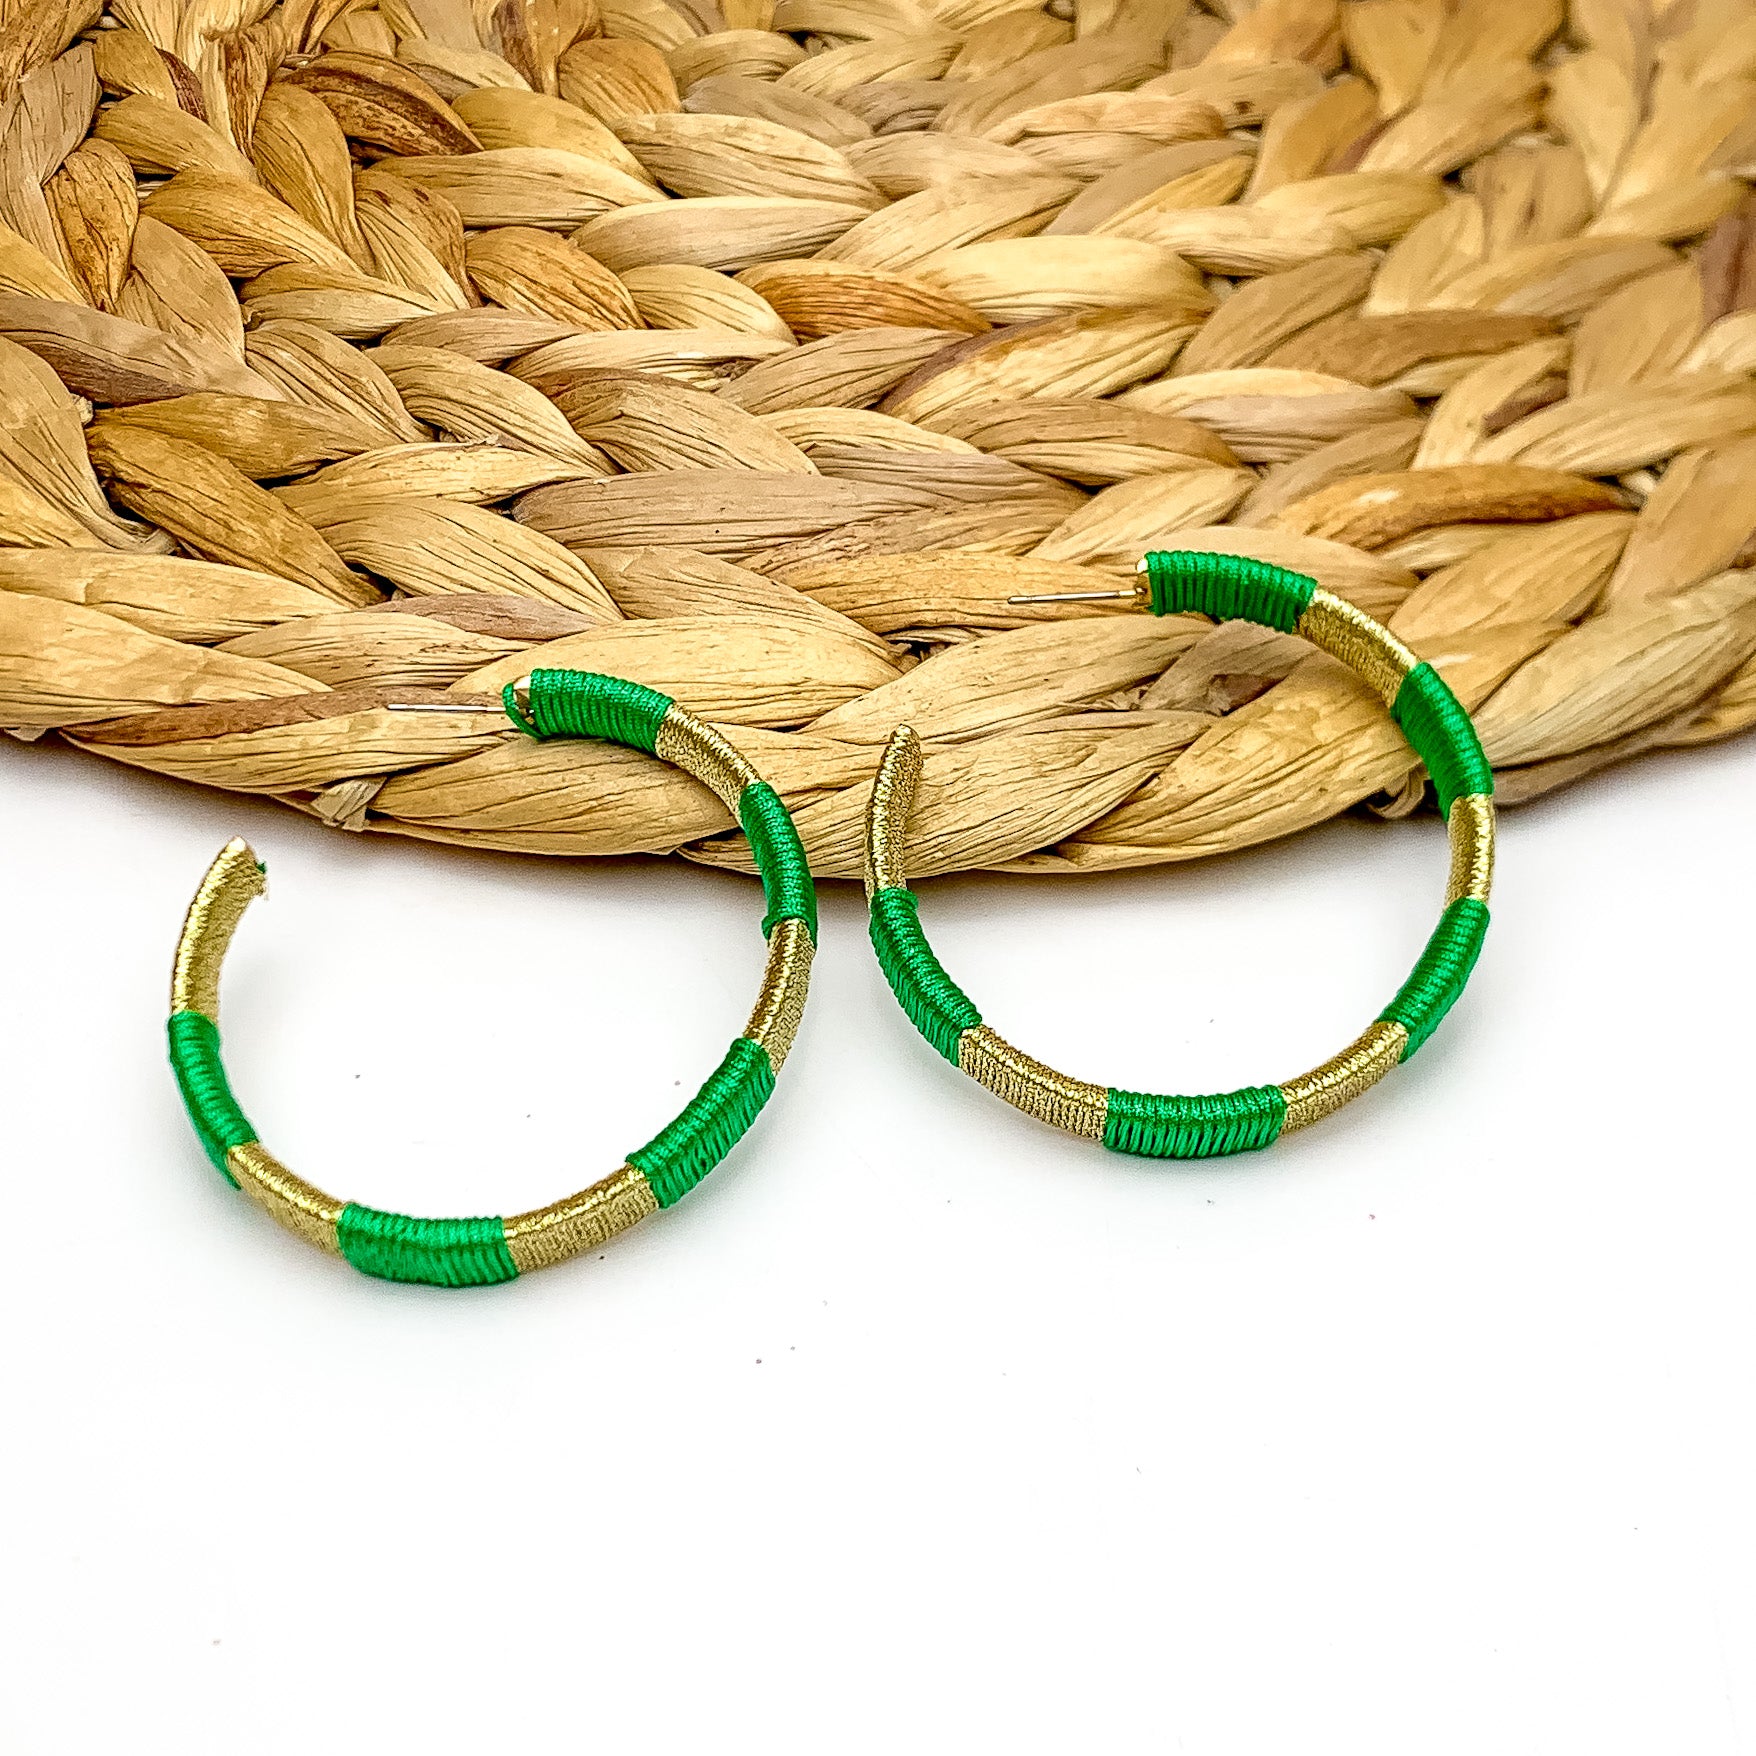 Game Day Glam Colored Hoop Earrings in Green and Gold. The two colored hoops are laying against a woven decoration with a white background.